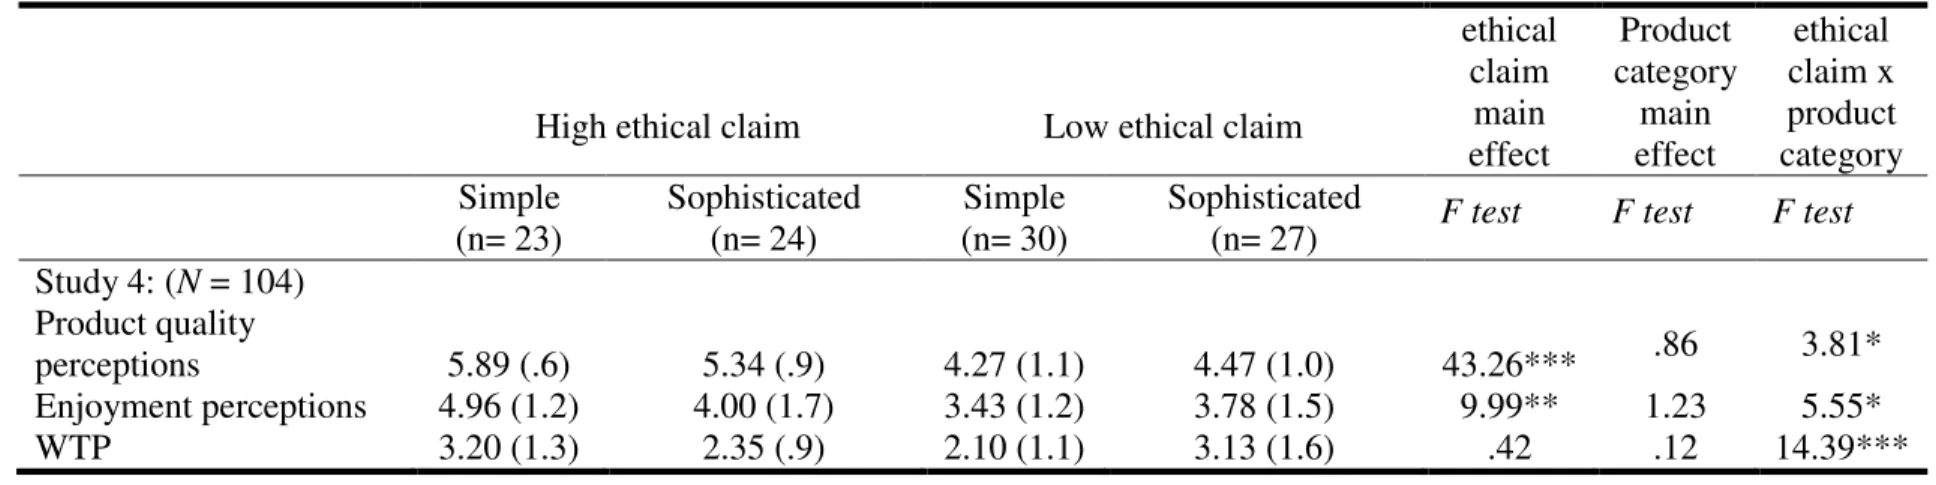 Table 3.3. The Impact of Ethical Claims ’ I ntensity on Simple versus Sophisticated Service Cat egories’ E valuations: Study 4 